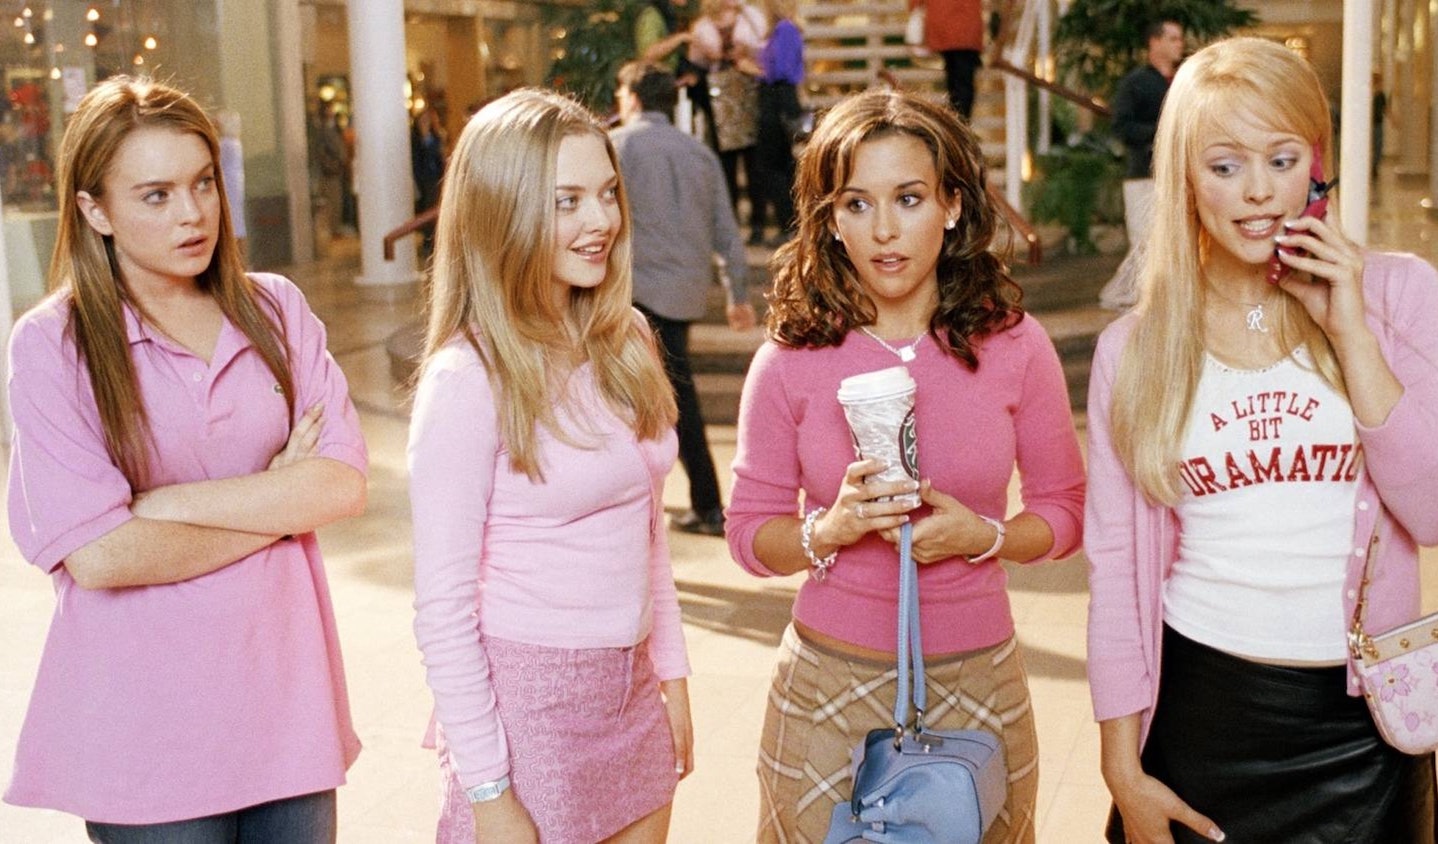 Lindsay Lohan Wants To Make Her Big Screen Return With ‘Mean Girls’ Sequel